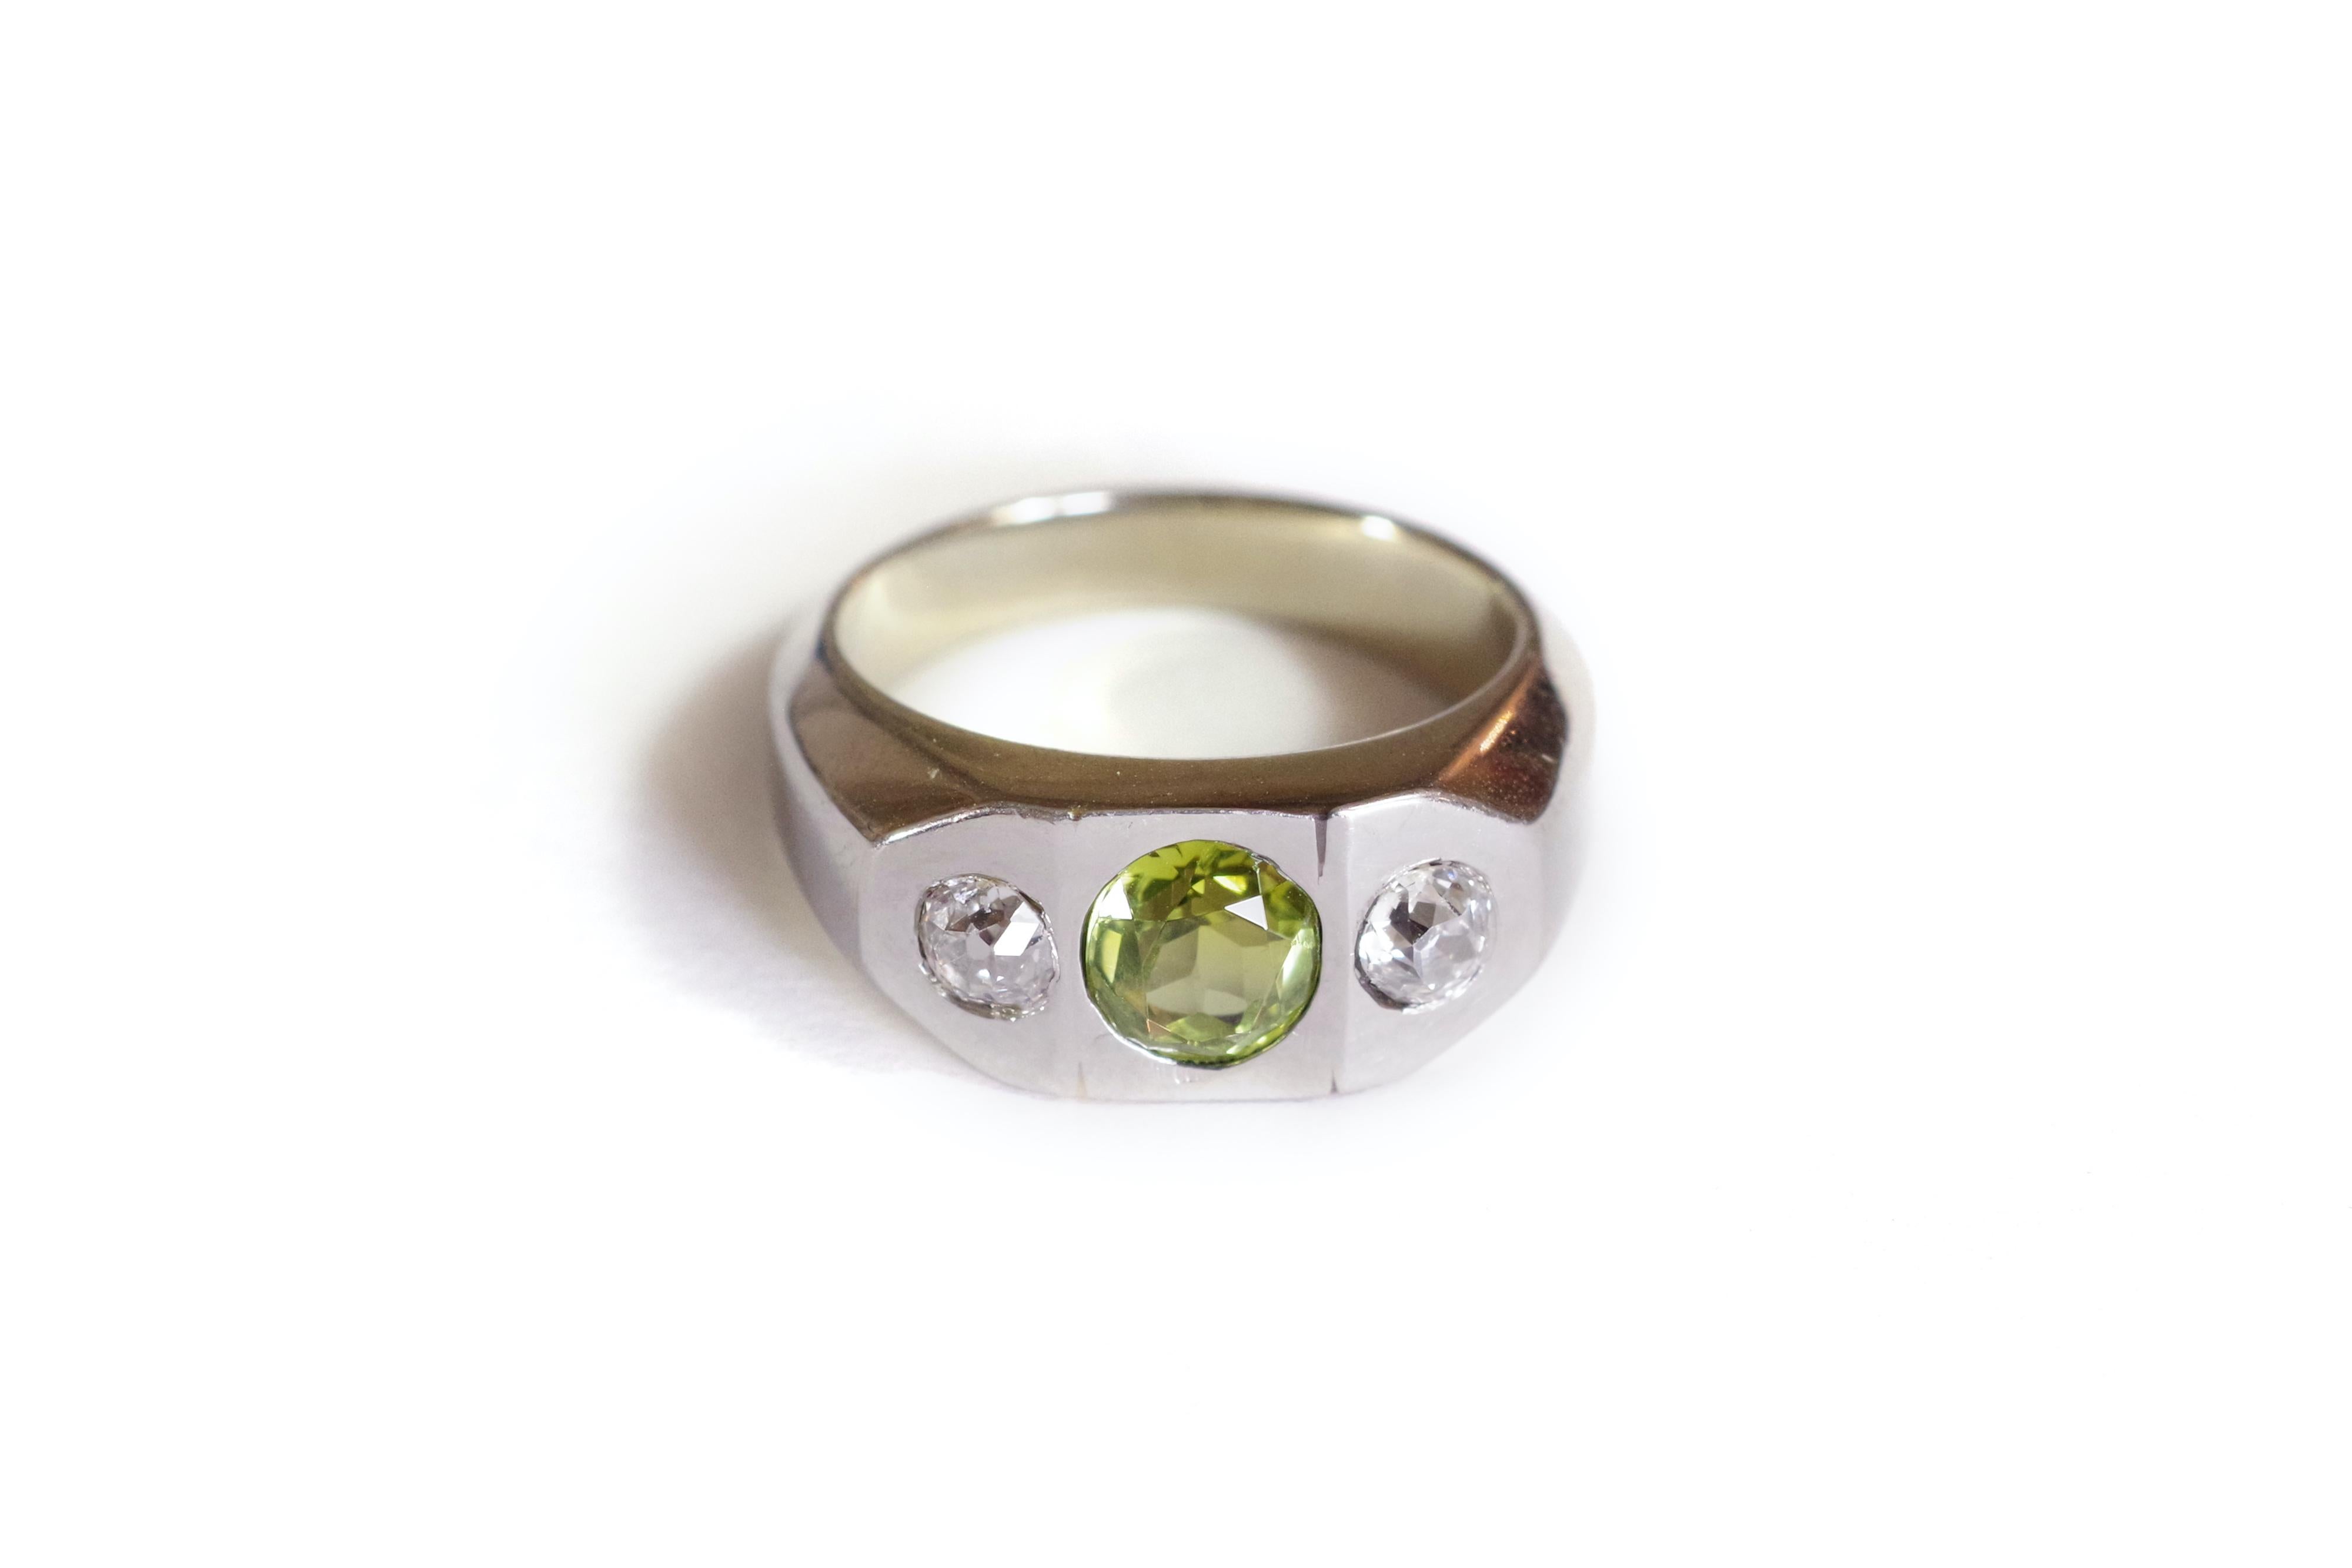 Diamond and tourmaline signet ring in 18k white gold. In the center, an oval green tourmaline, also called verdelite, framed by two European old cut diamonds. The three gems are set in a large ring with geometric lines, displaying modernist lines.